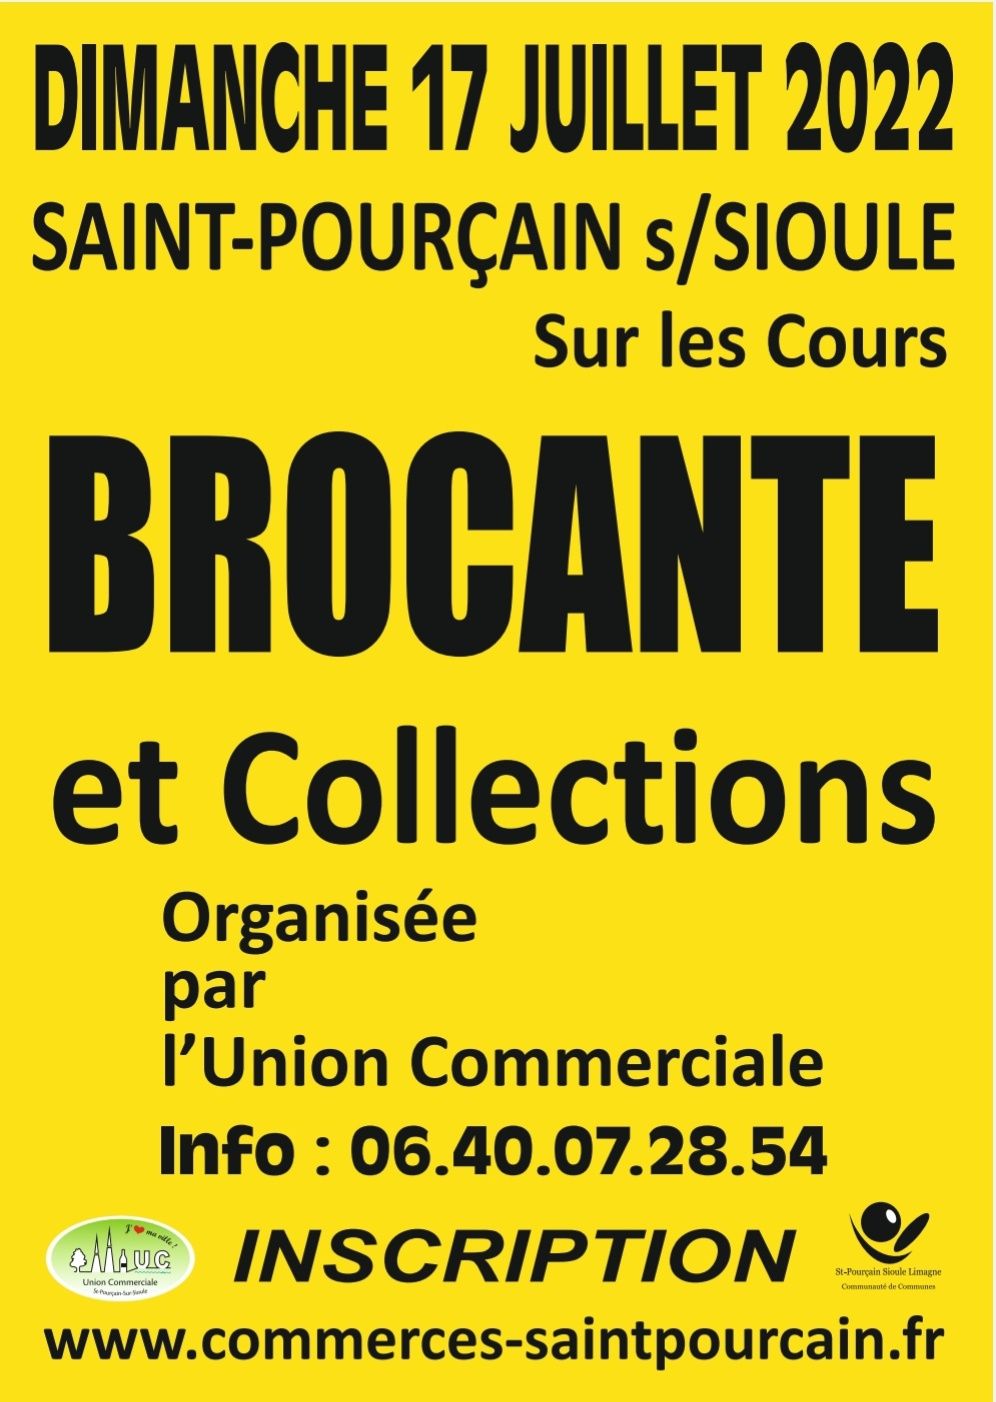 Brocante et Collections